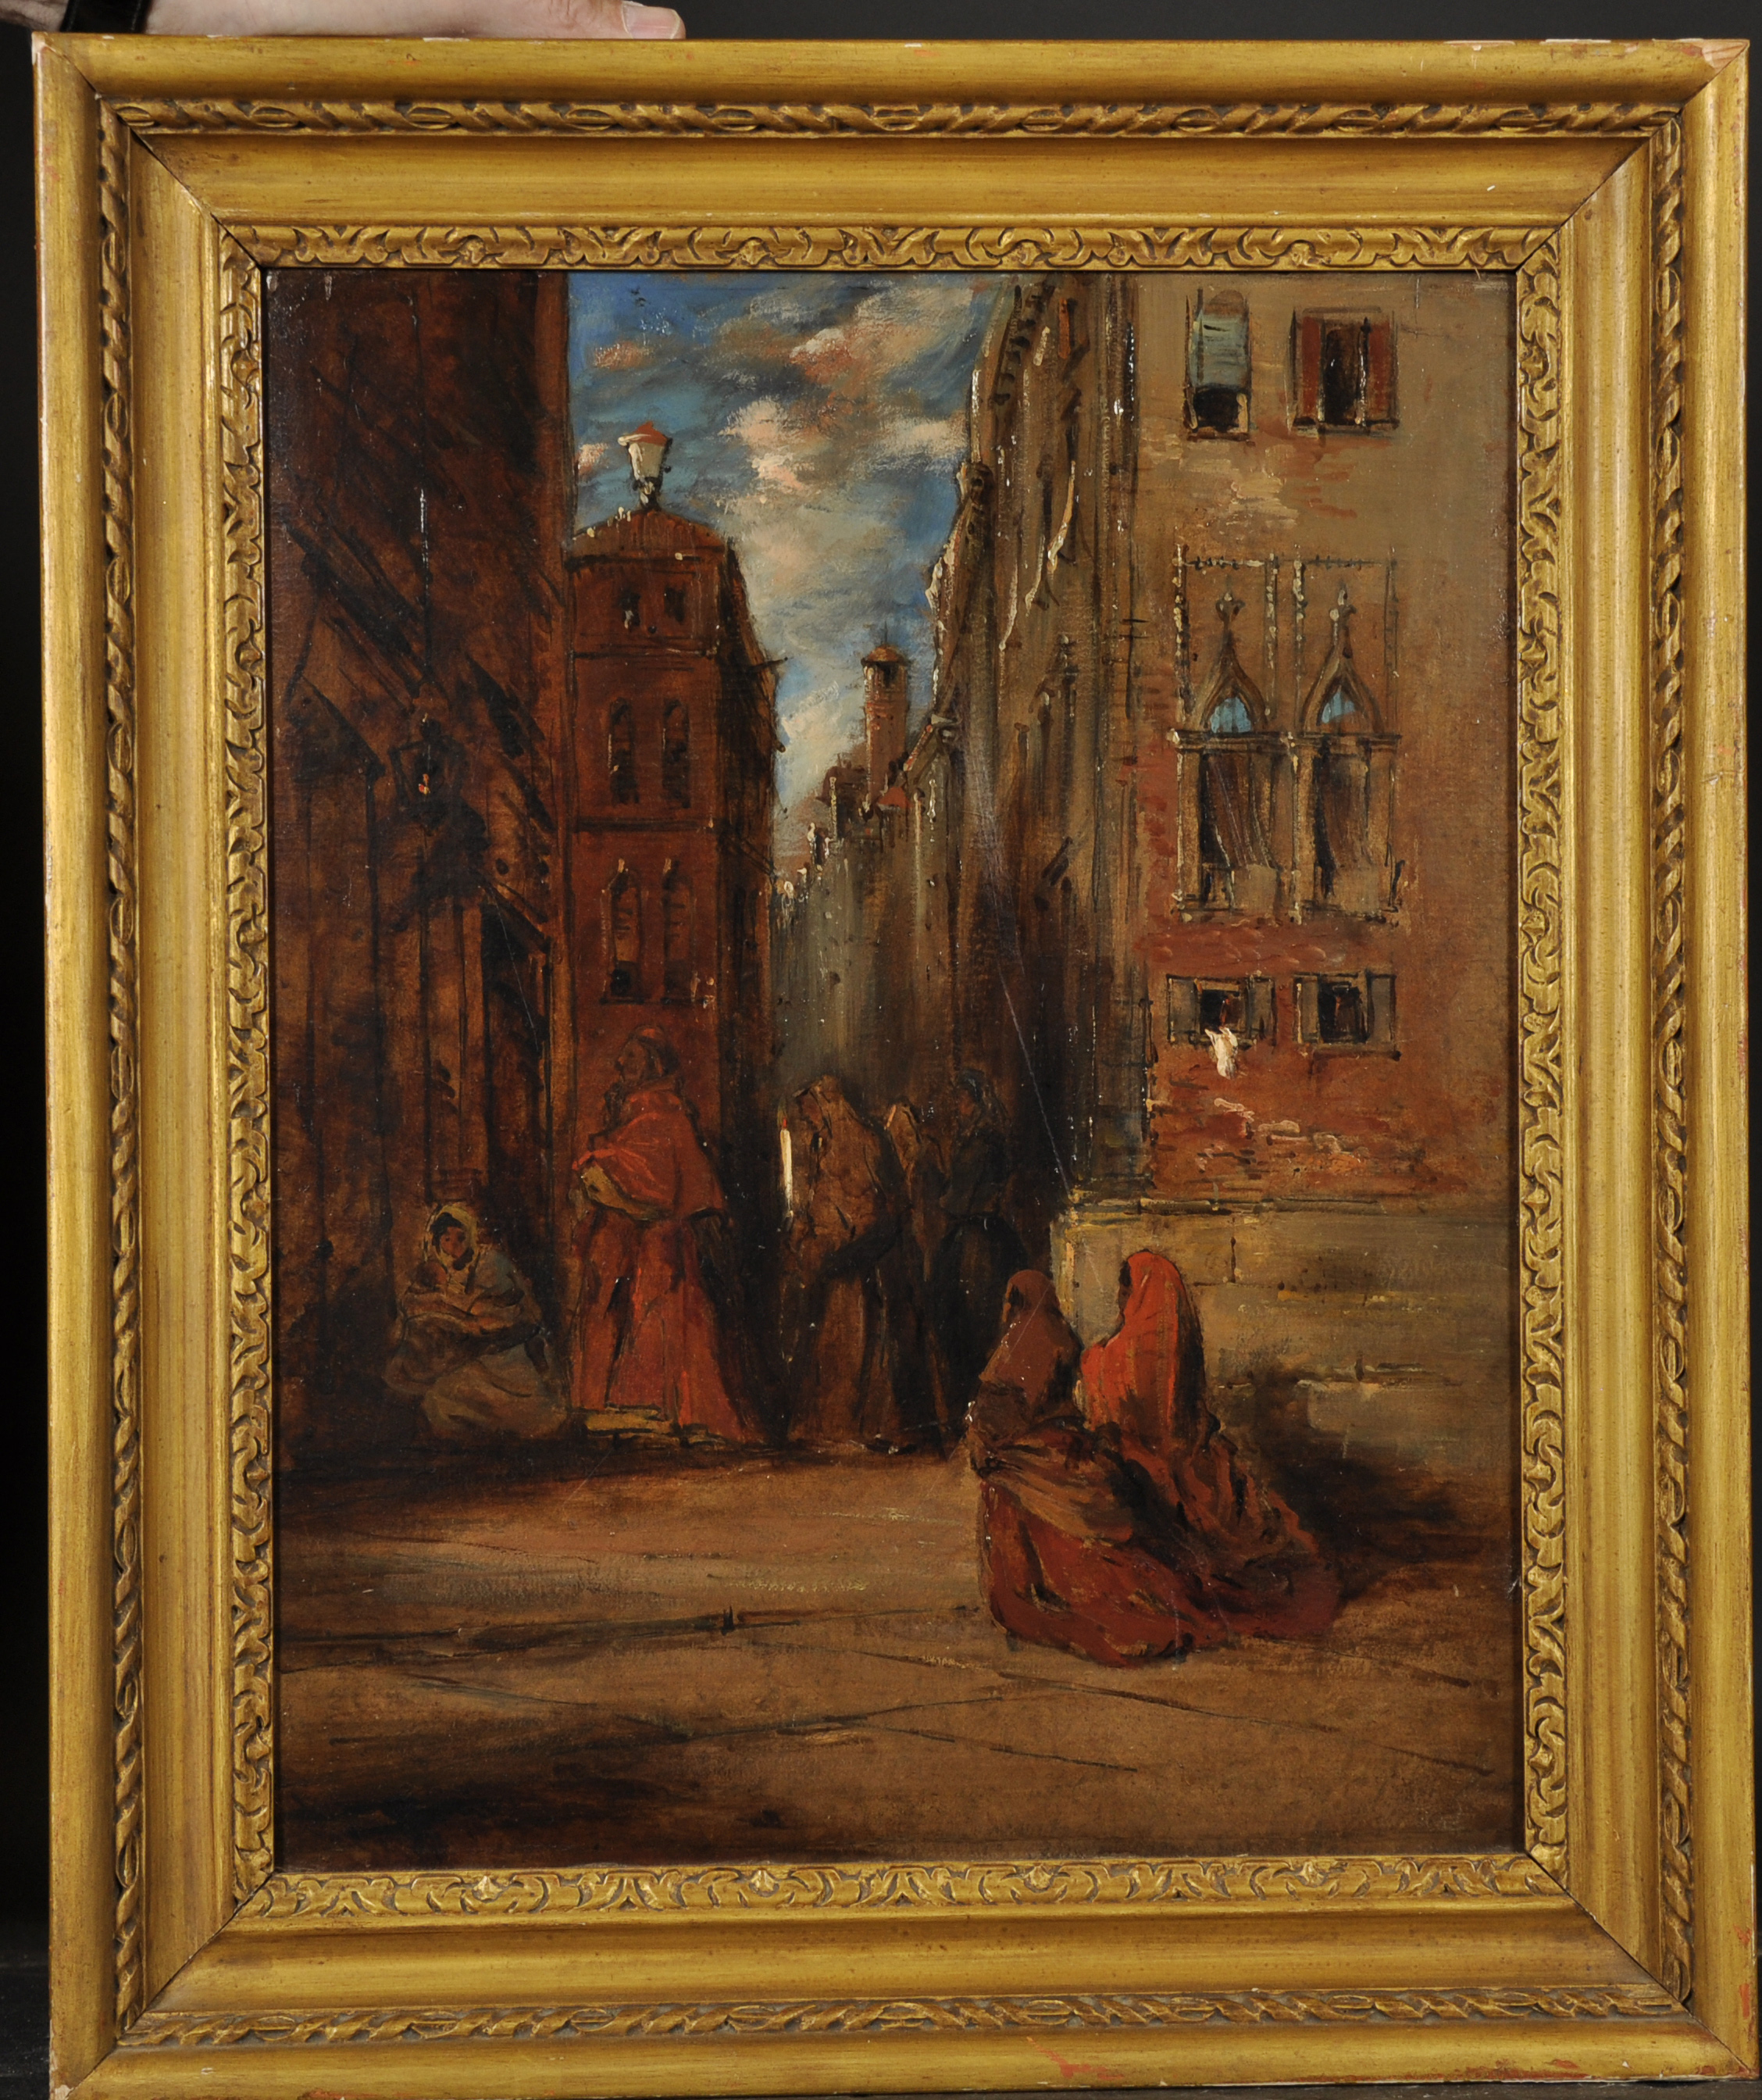 James Holland (1799/1800-1870) British. A Venetian Scene, with Figures entering a Church, Oil on - Image 2 of 5